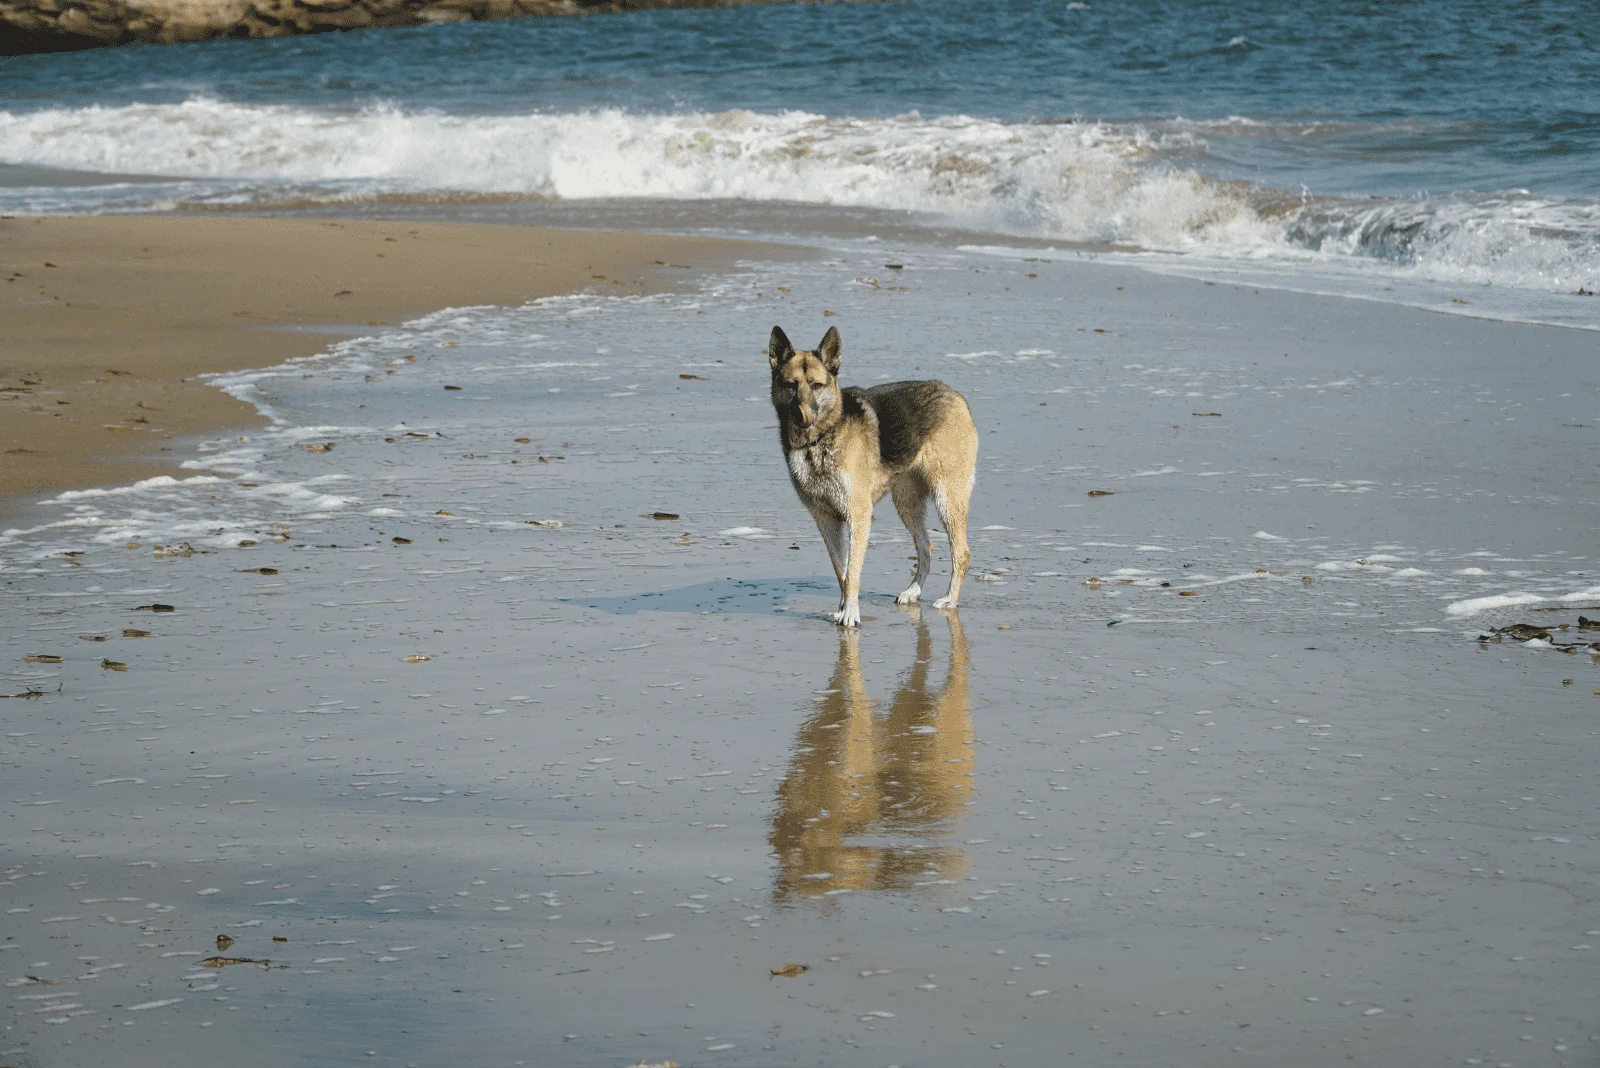 German Shepherd standing on the sand by the sea